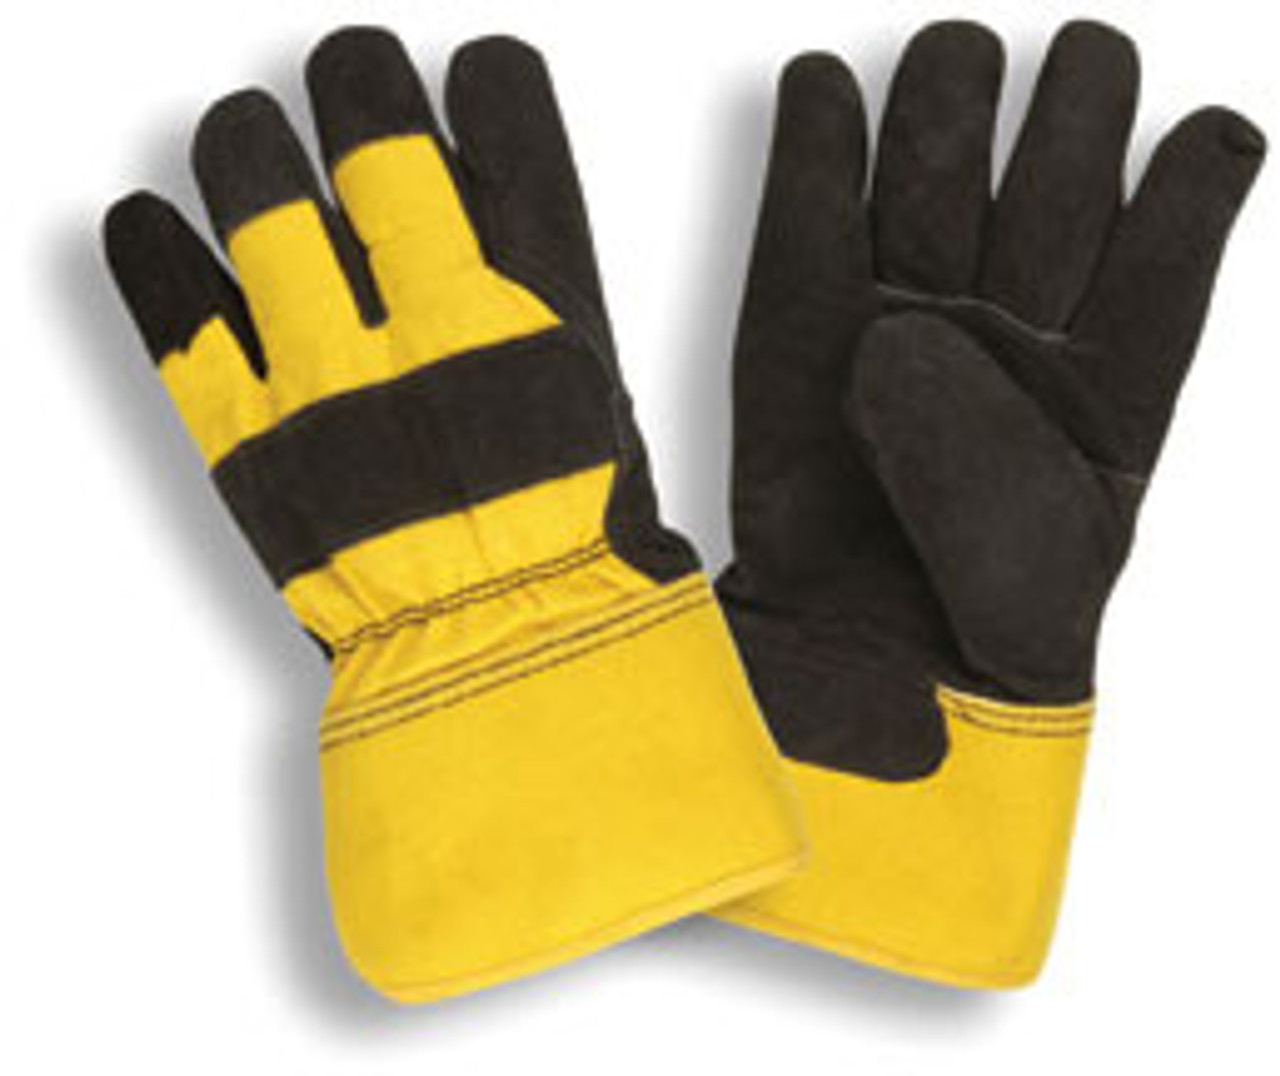 BLACK LP W/ YELLOW CANVAS BACK, INSULATED--S